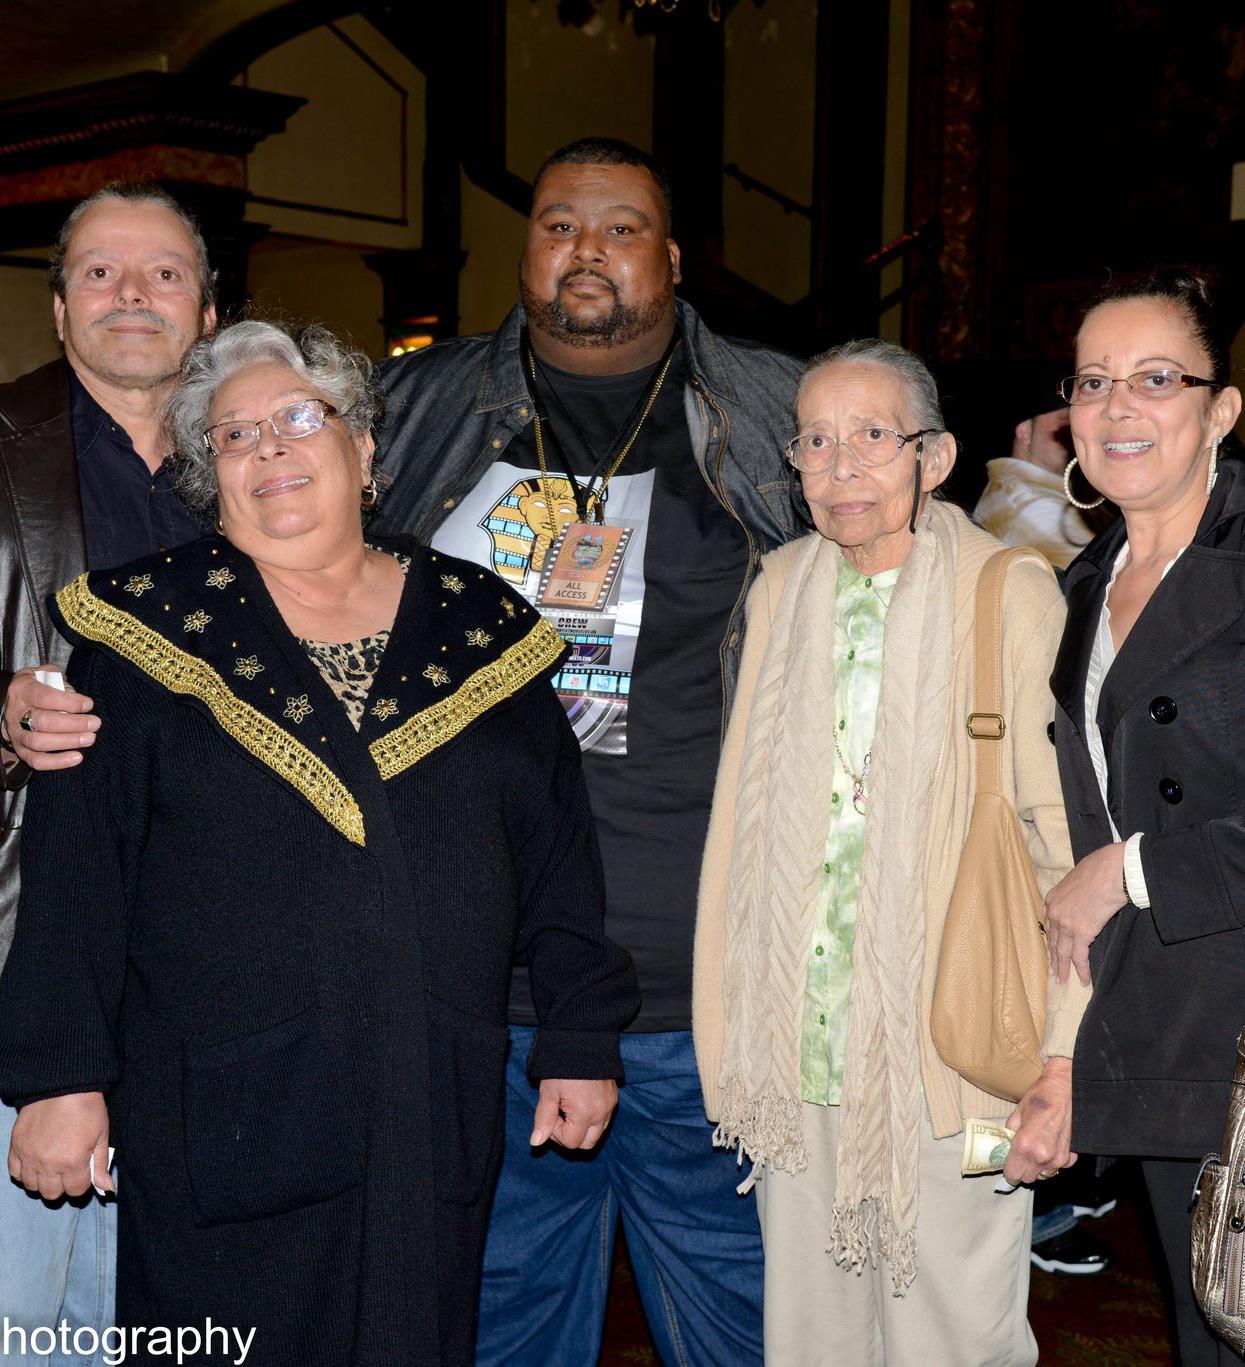 My Family at the Premiere of Watch Phoenix Rise at the Grand Lake Theater in Oakland California.